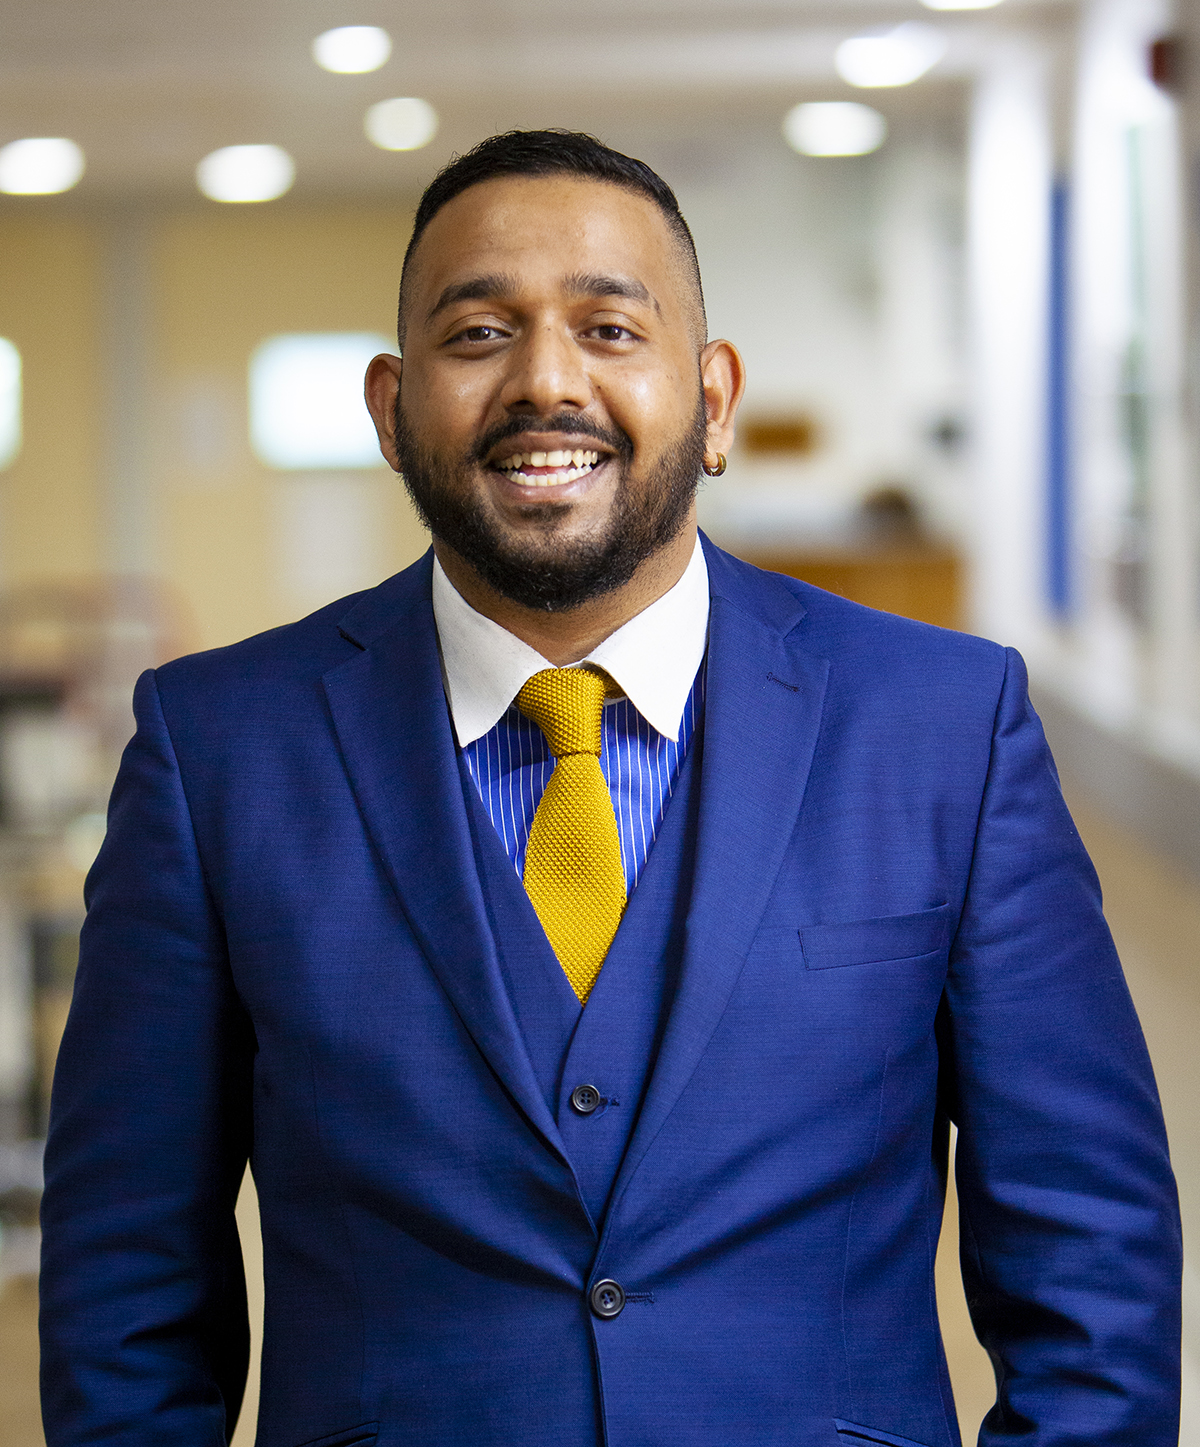 Meet Augustus Mohan who is studying a Chartered Manager Degree Apprenticeship